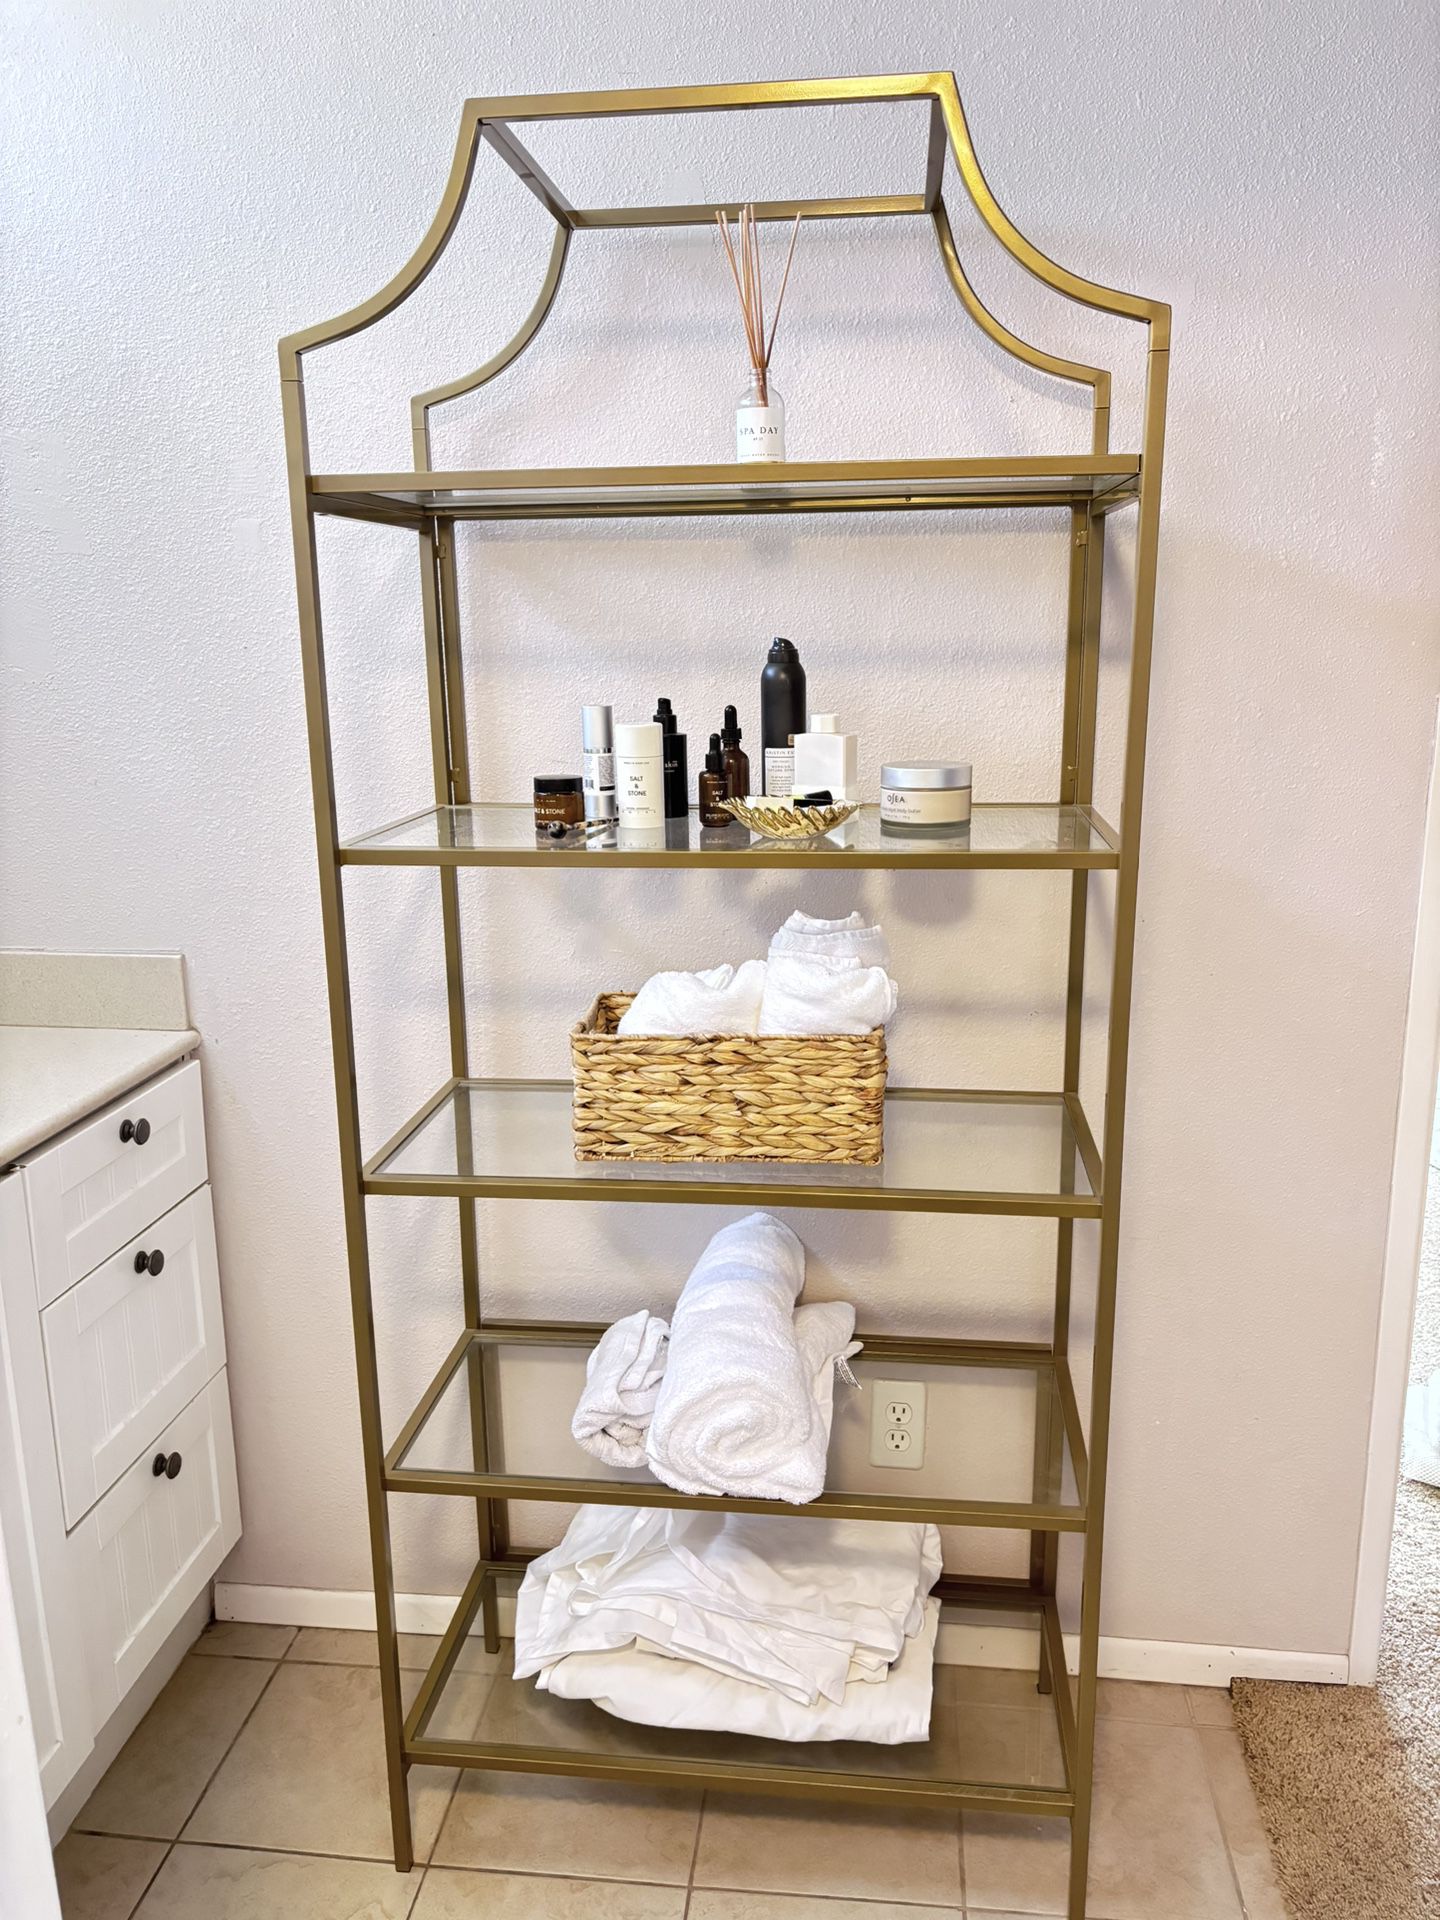 Unique Gold frame glass bookshelf from Target